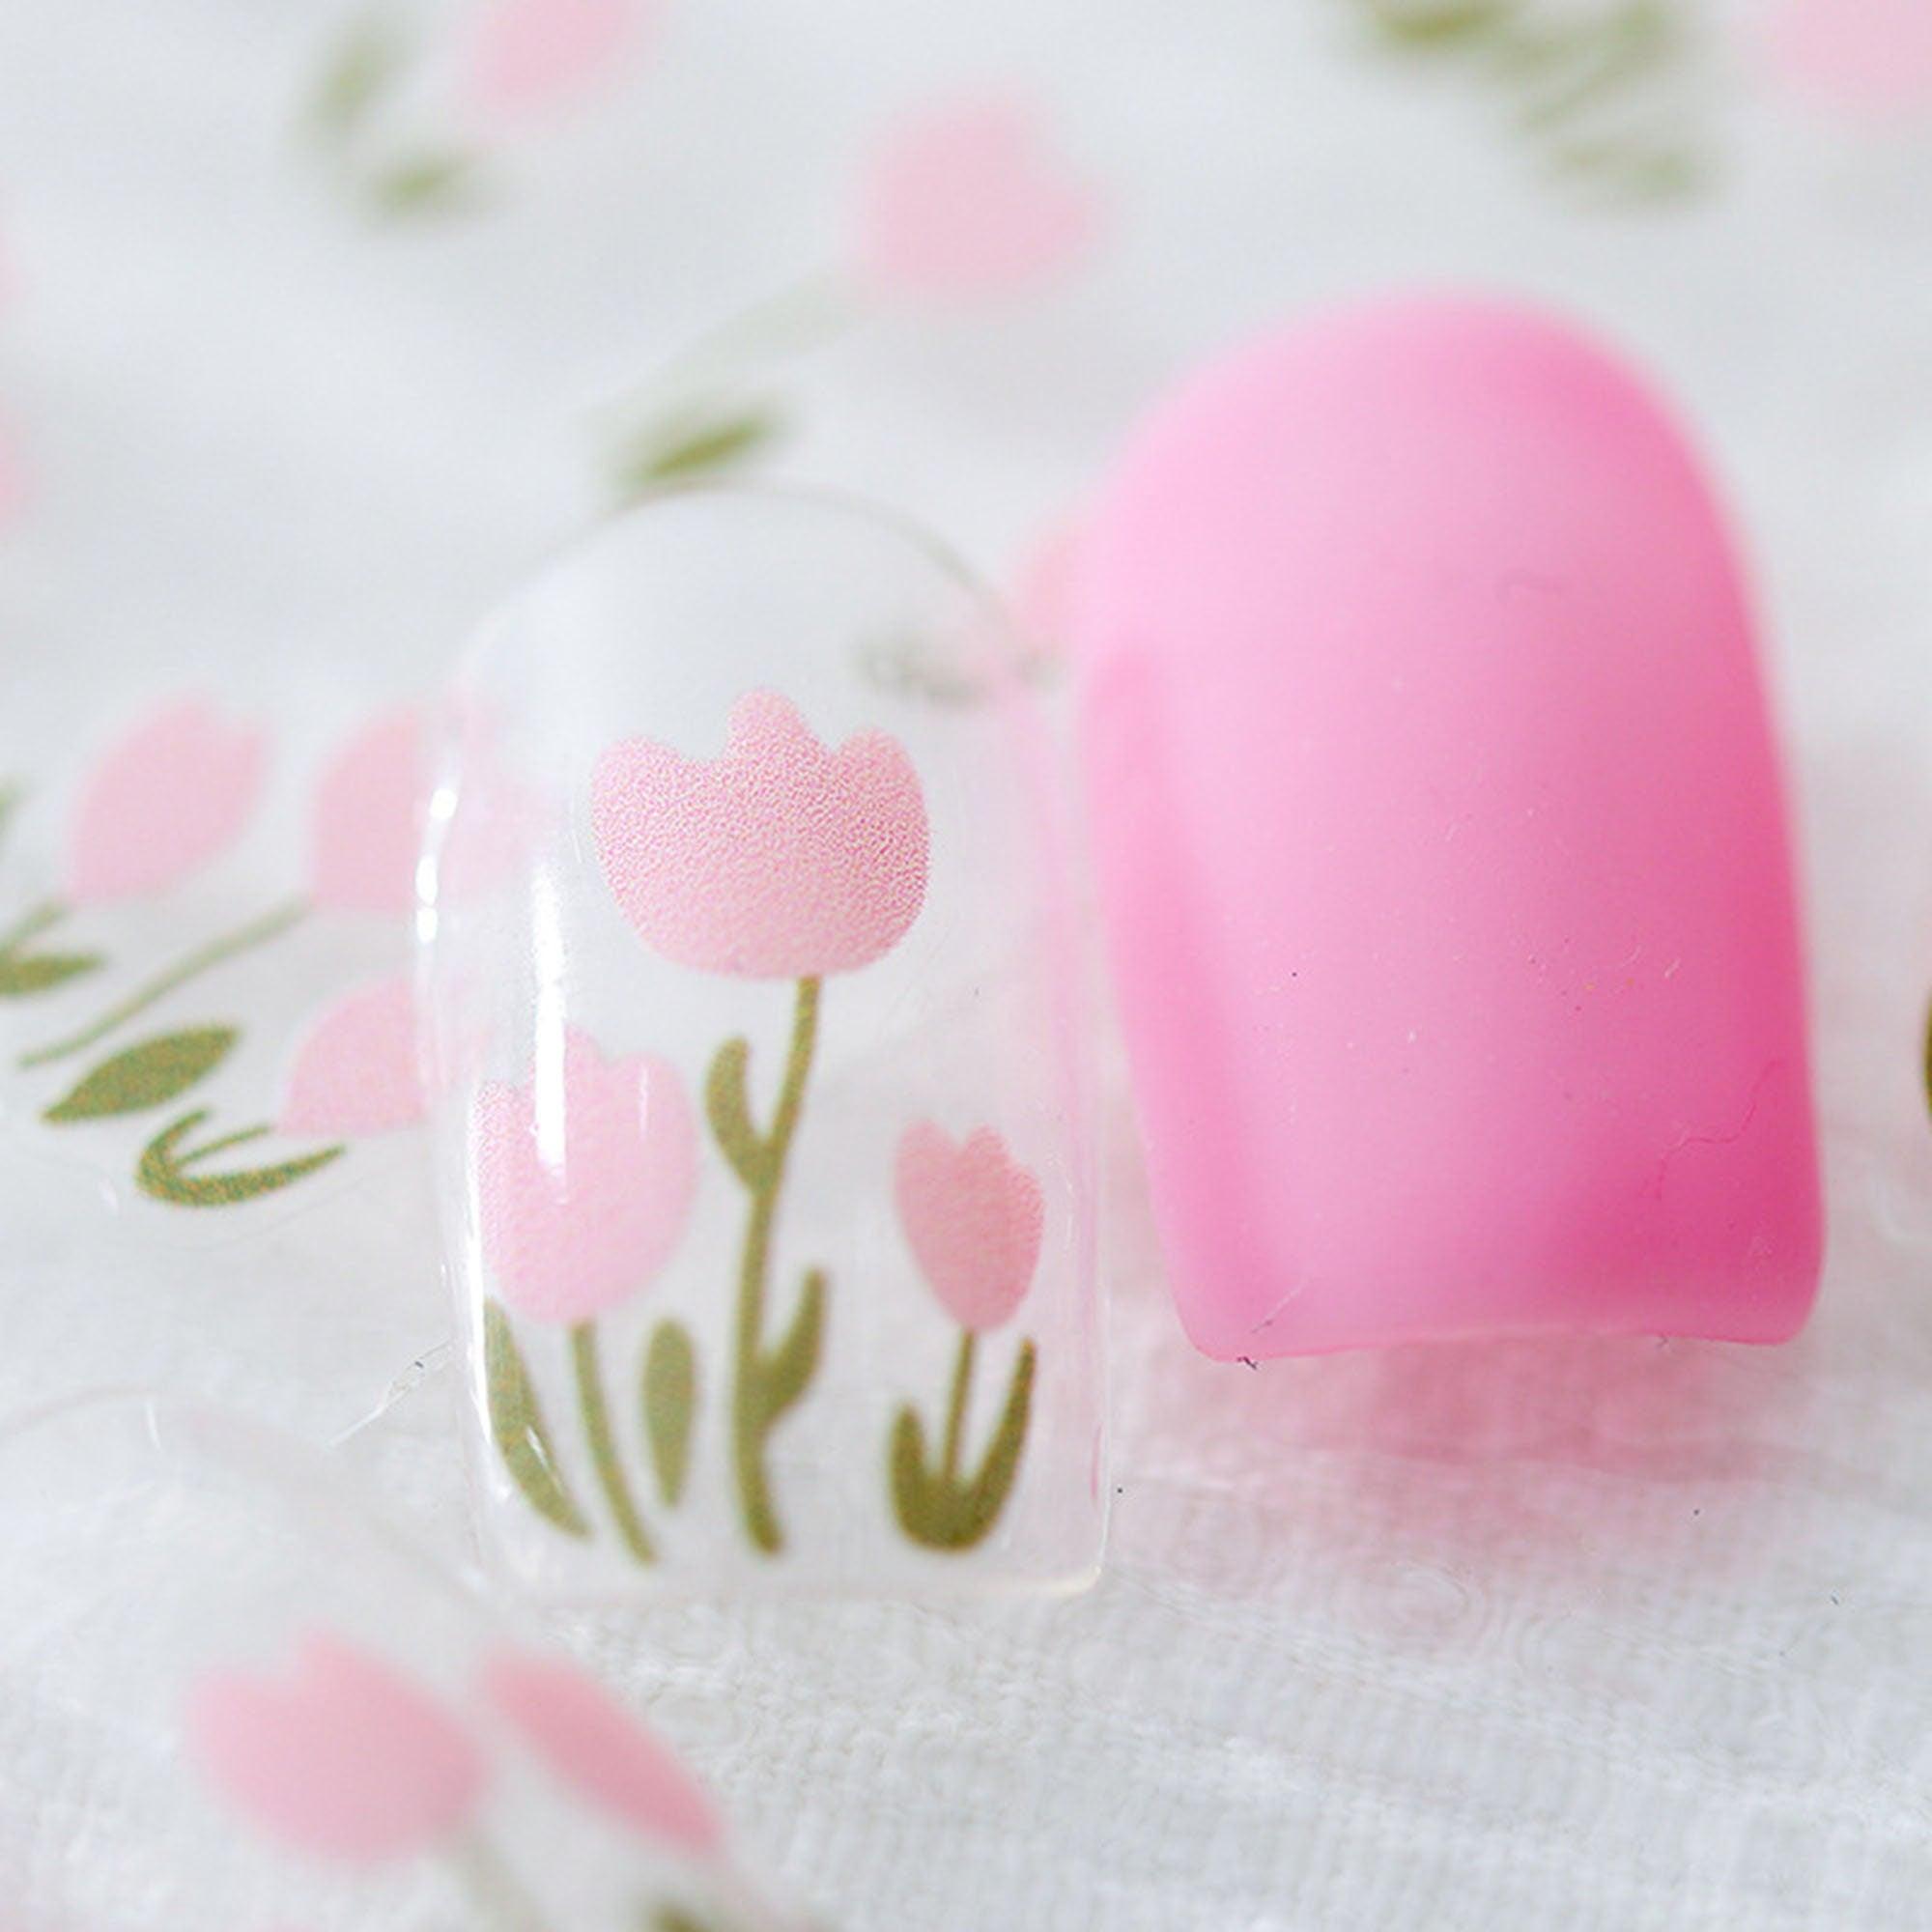 Flower Nail Stickers, Bloom Nail Decals, Spring Nail Decals, 5D Nails, 3D Nails, DIY Nails - Miss Fairy Nails